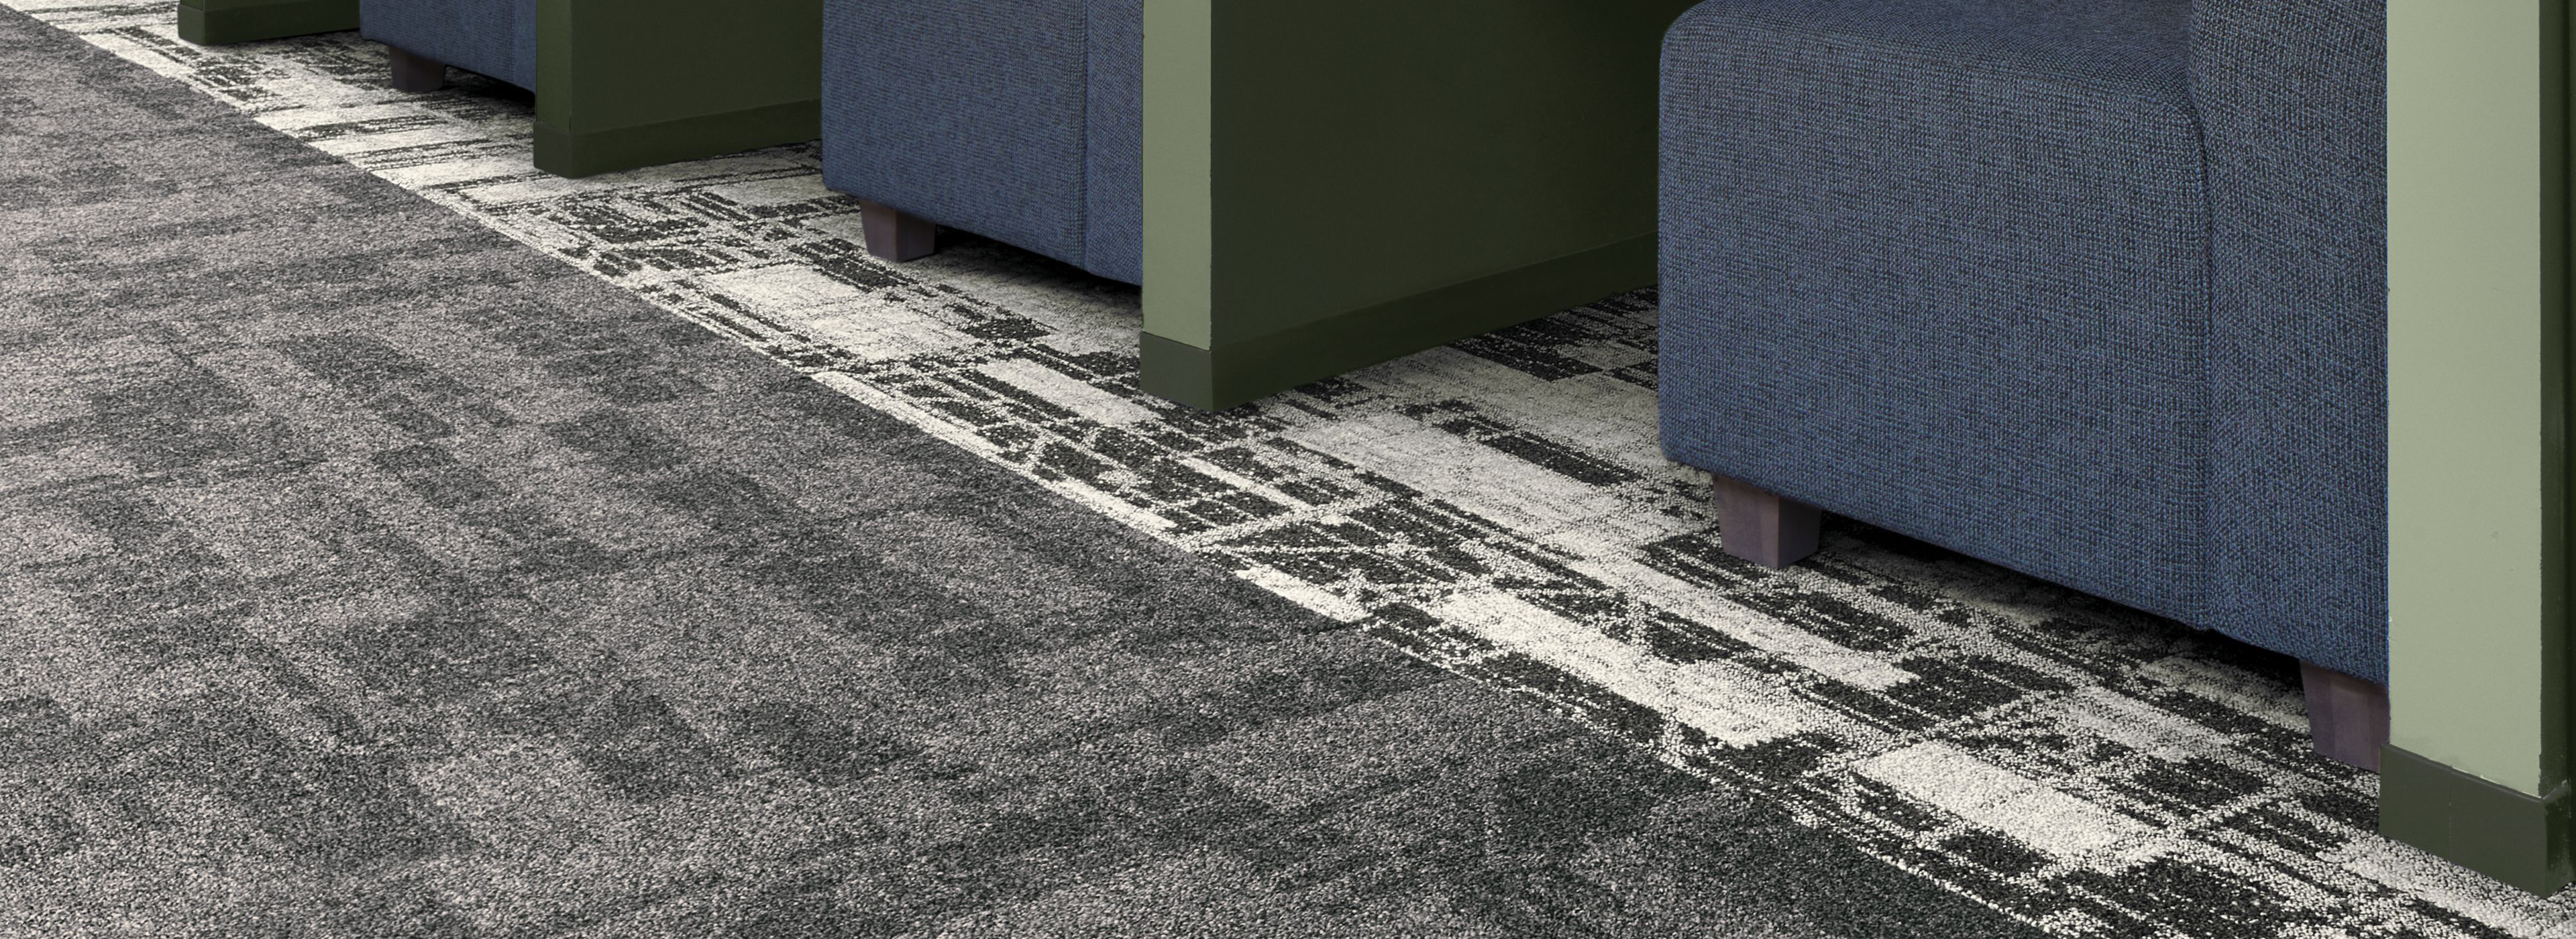 Interface Dynamic Duo carpet tile in private seating areas numéro d’image 1